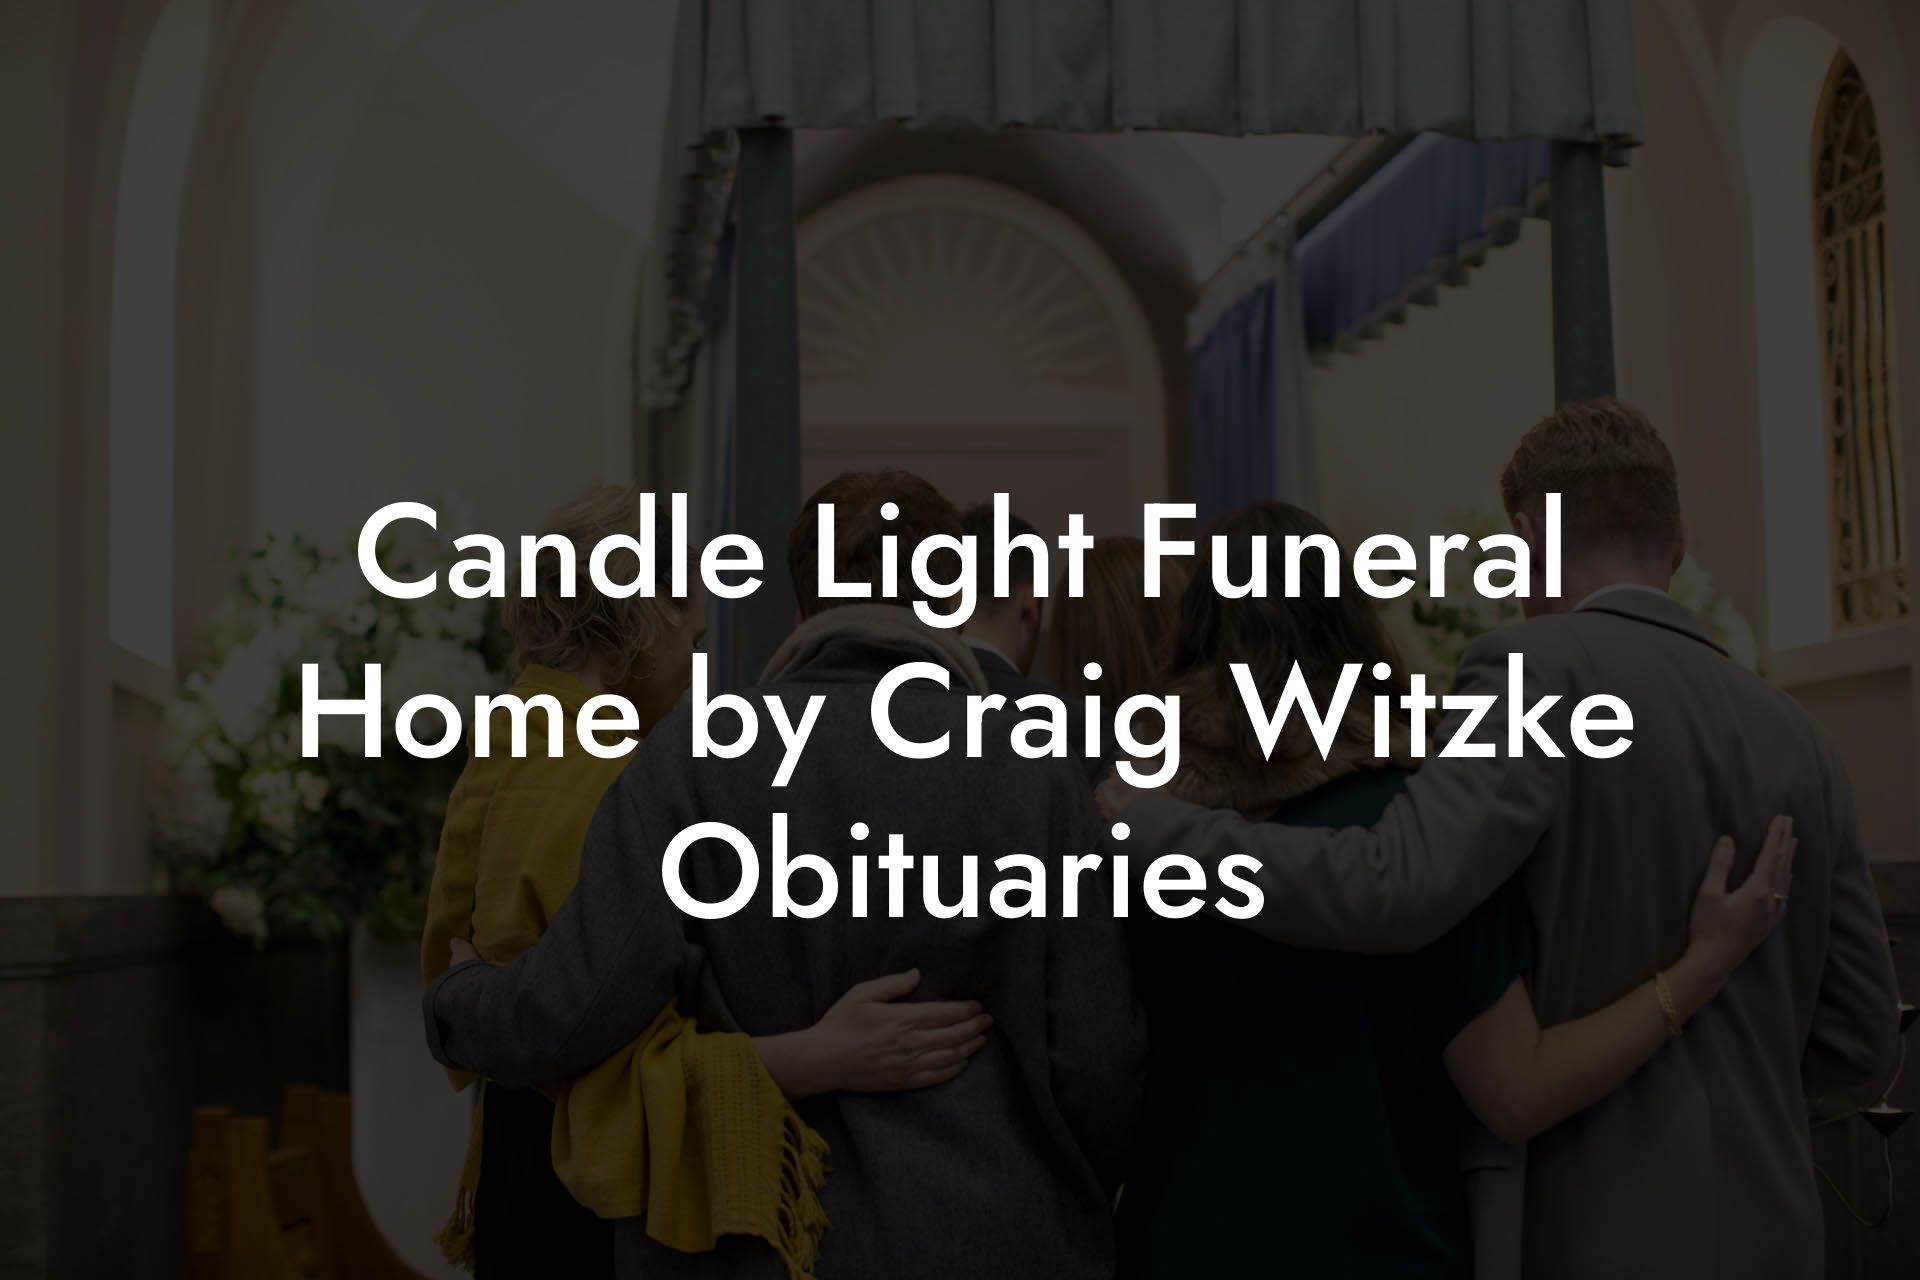 Candle Light Funeral Home by Craig Witzke Obituaries